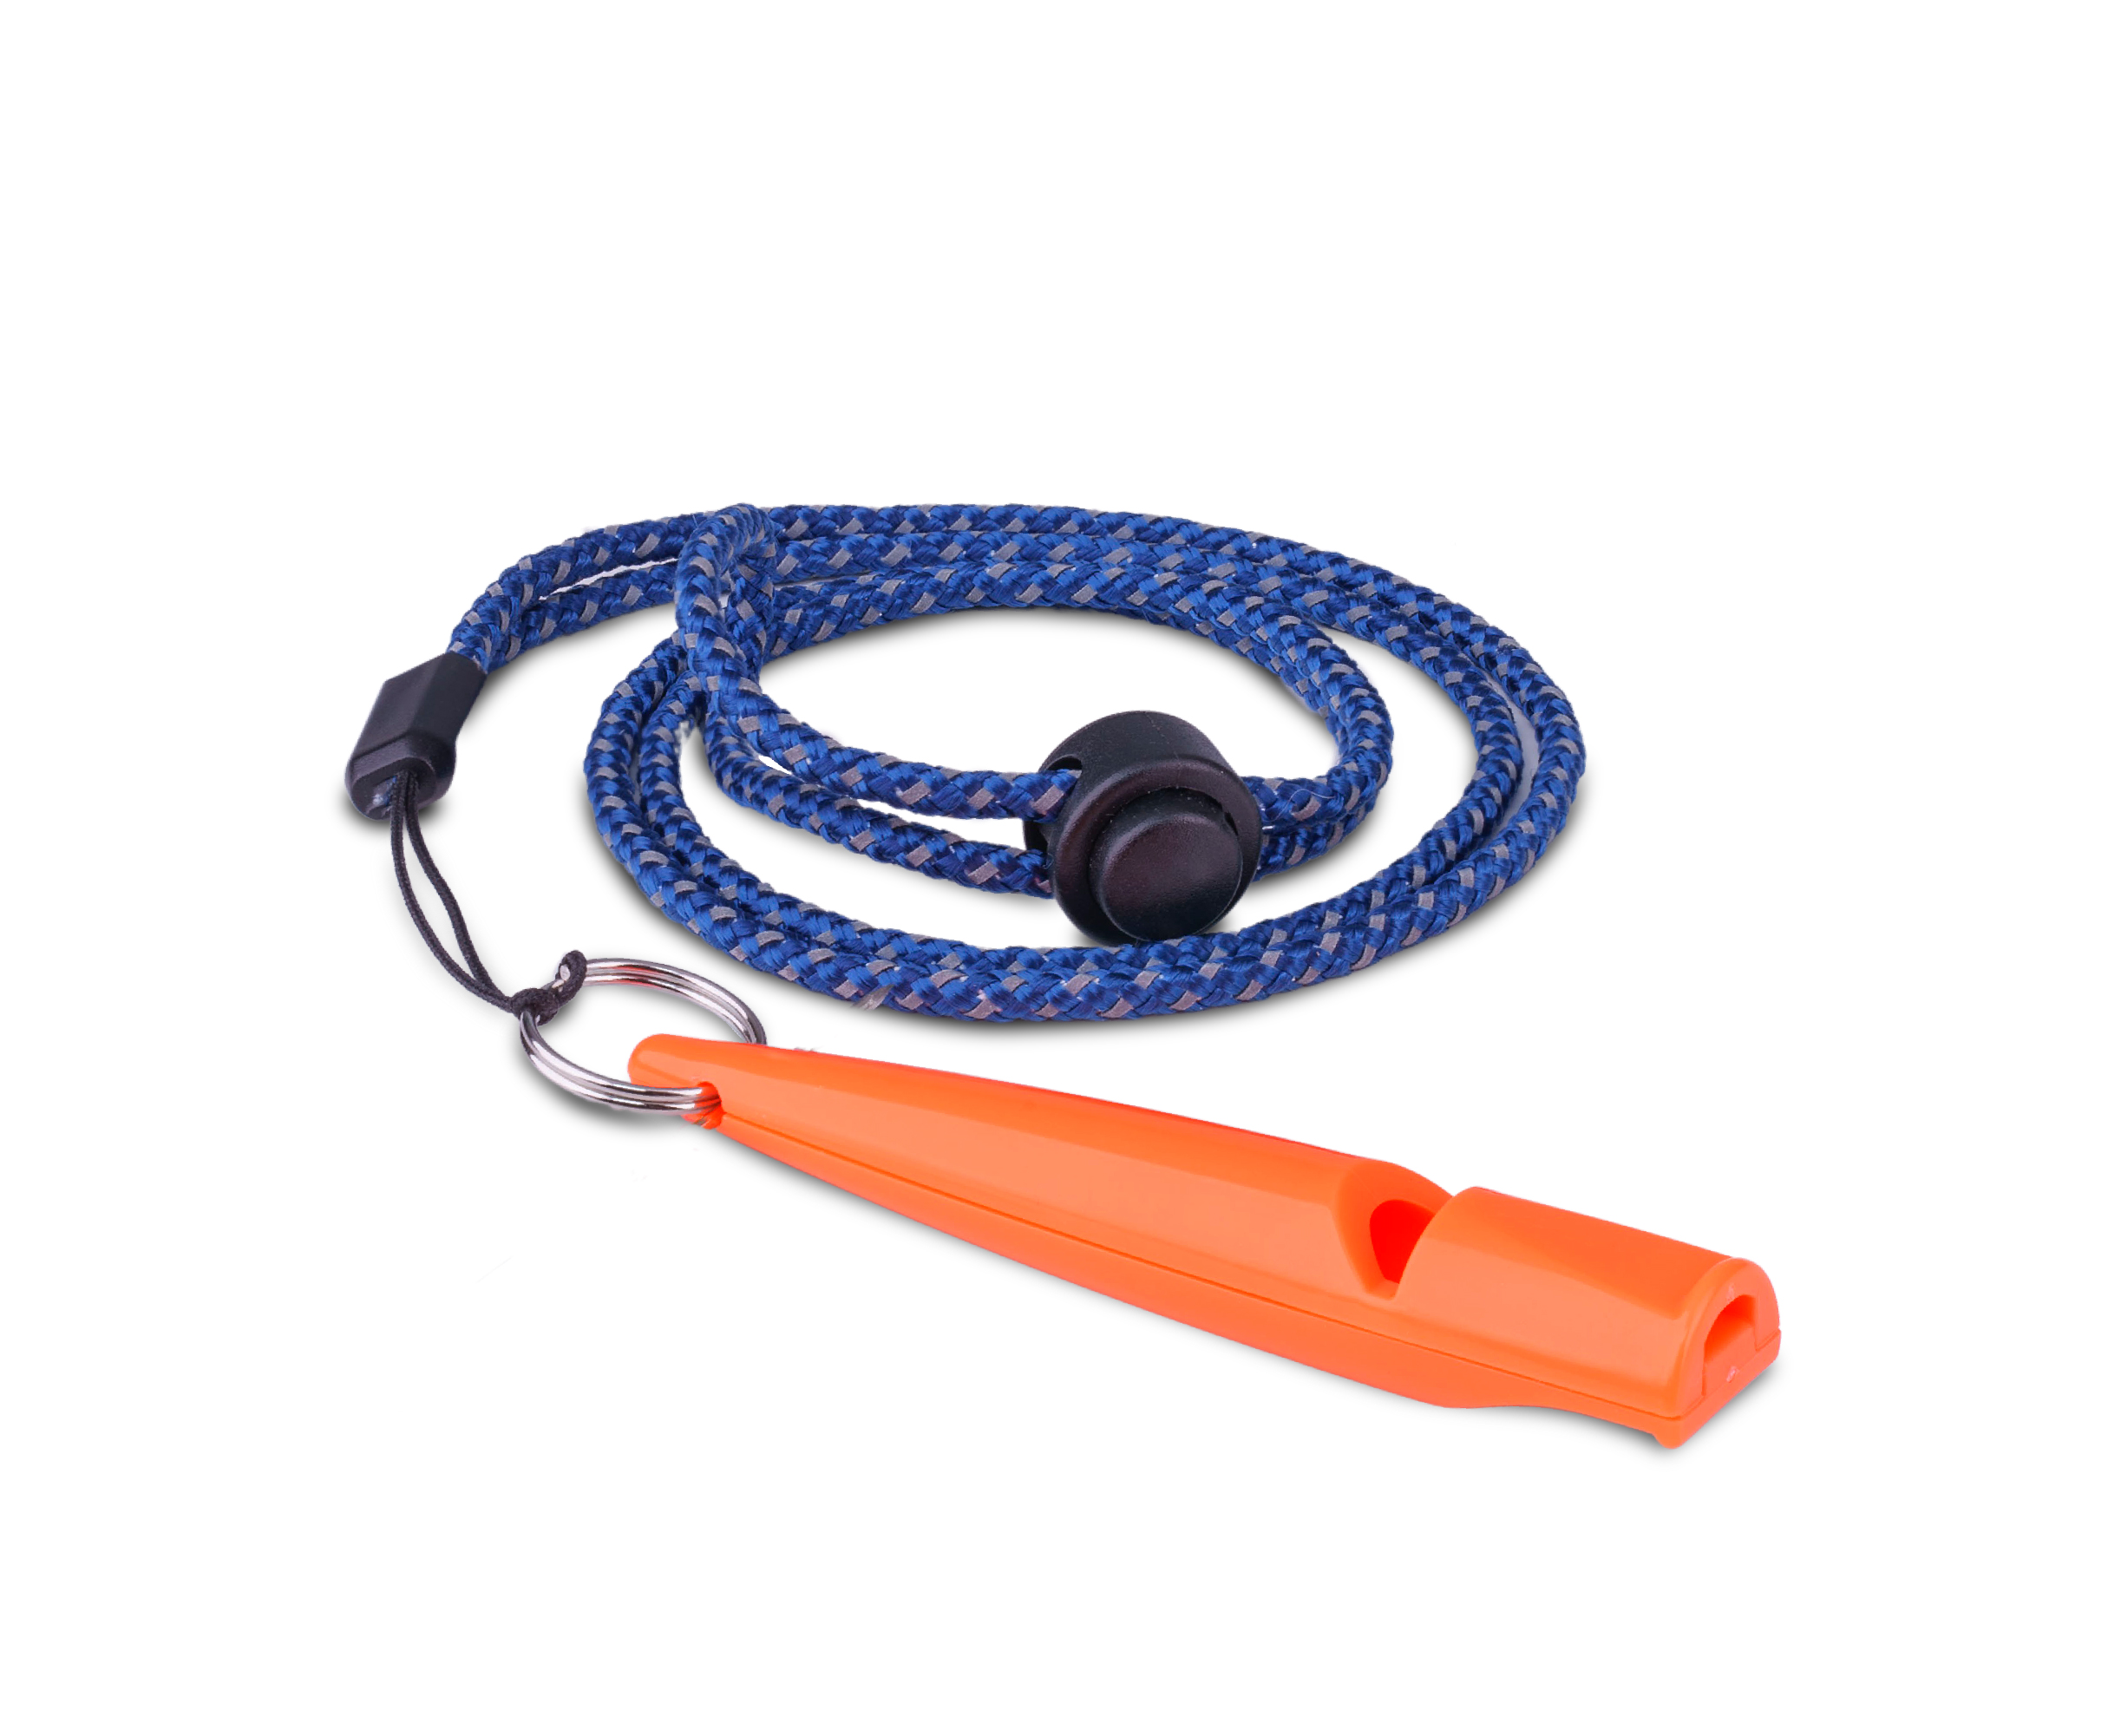 Coral dog training whistle